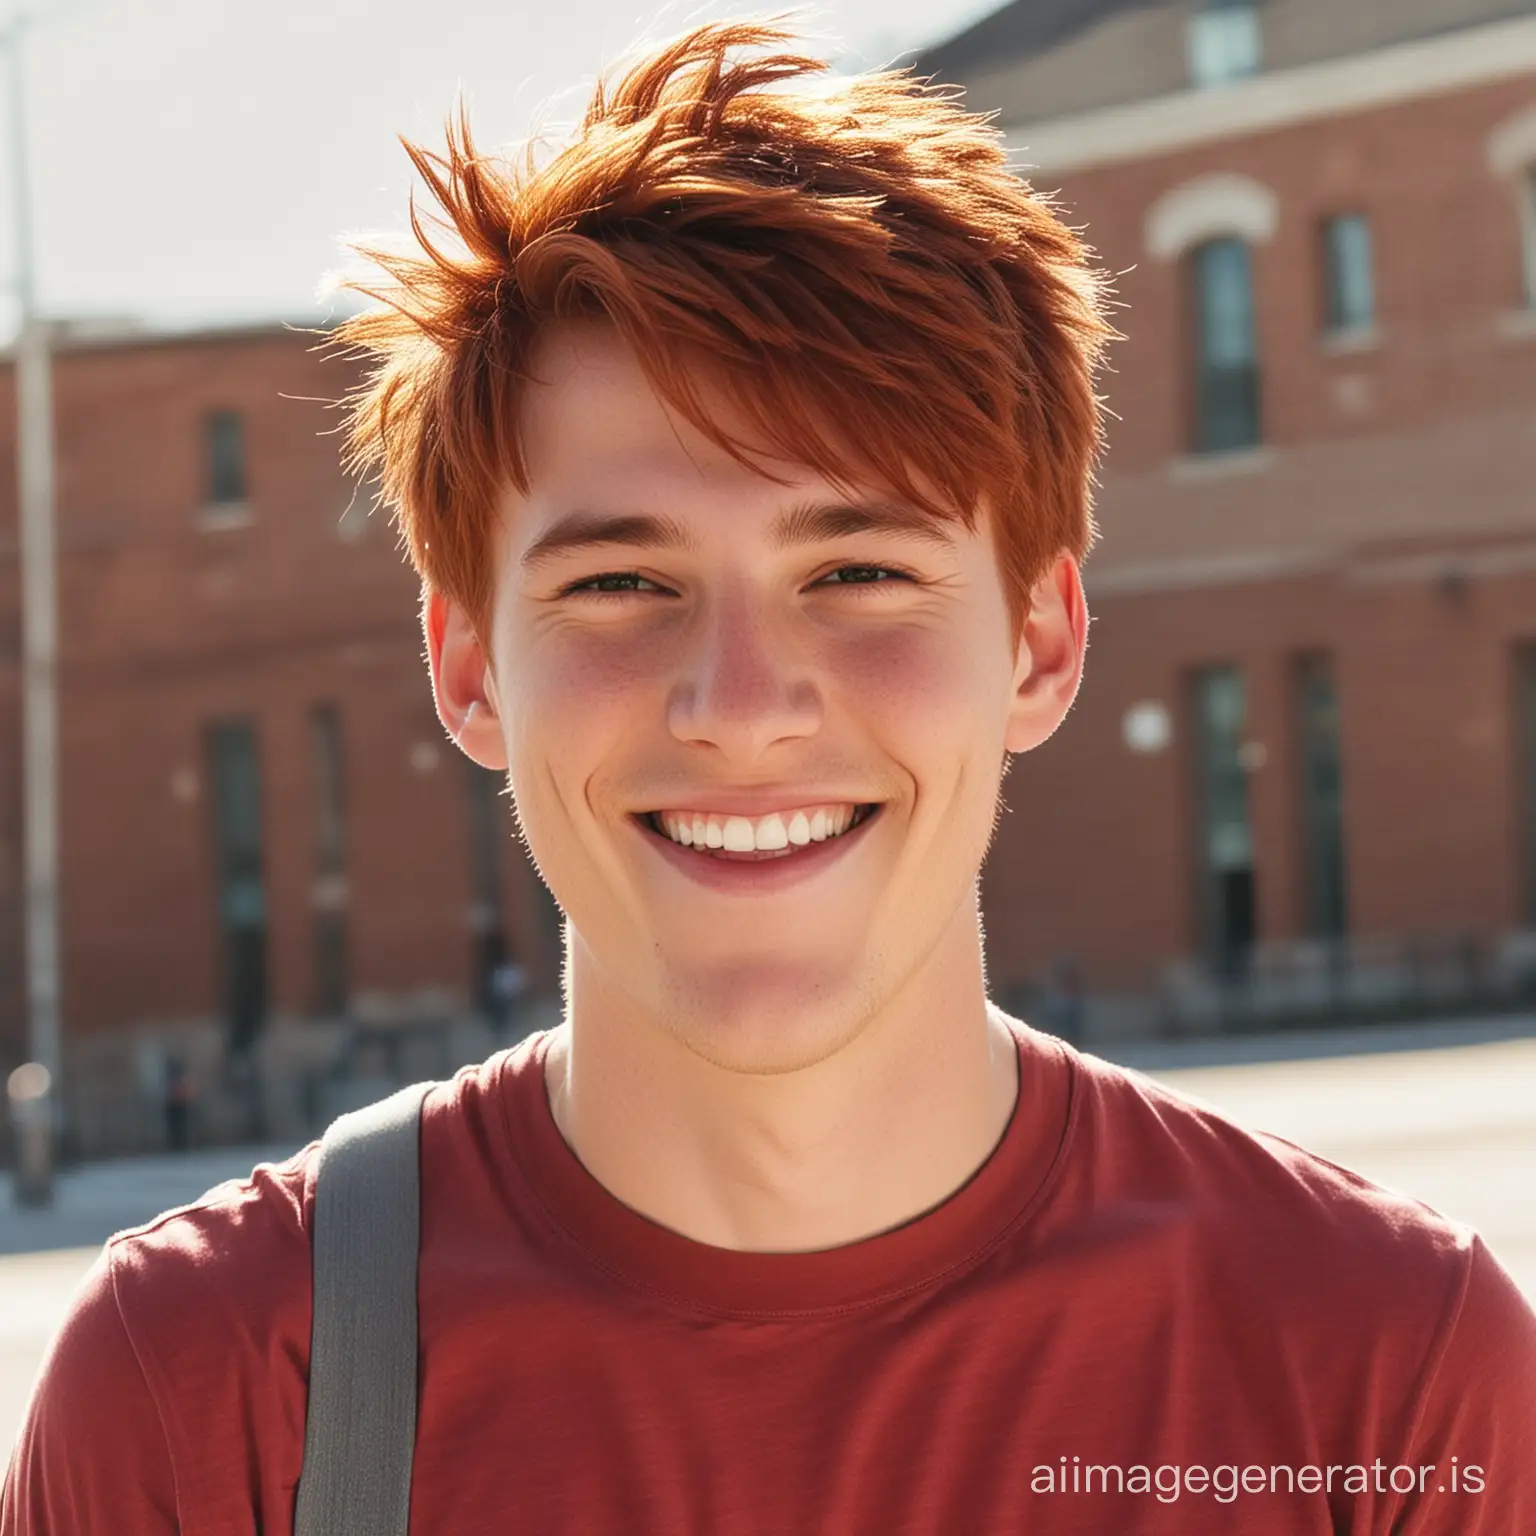 red hair guy guy, half body, college well casual fit 19 years old, smile, sunny, happy